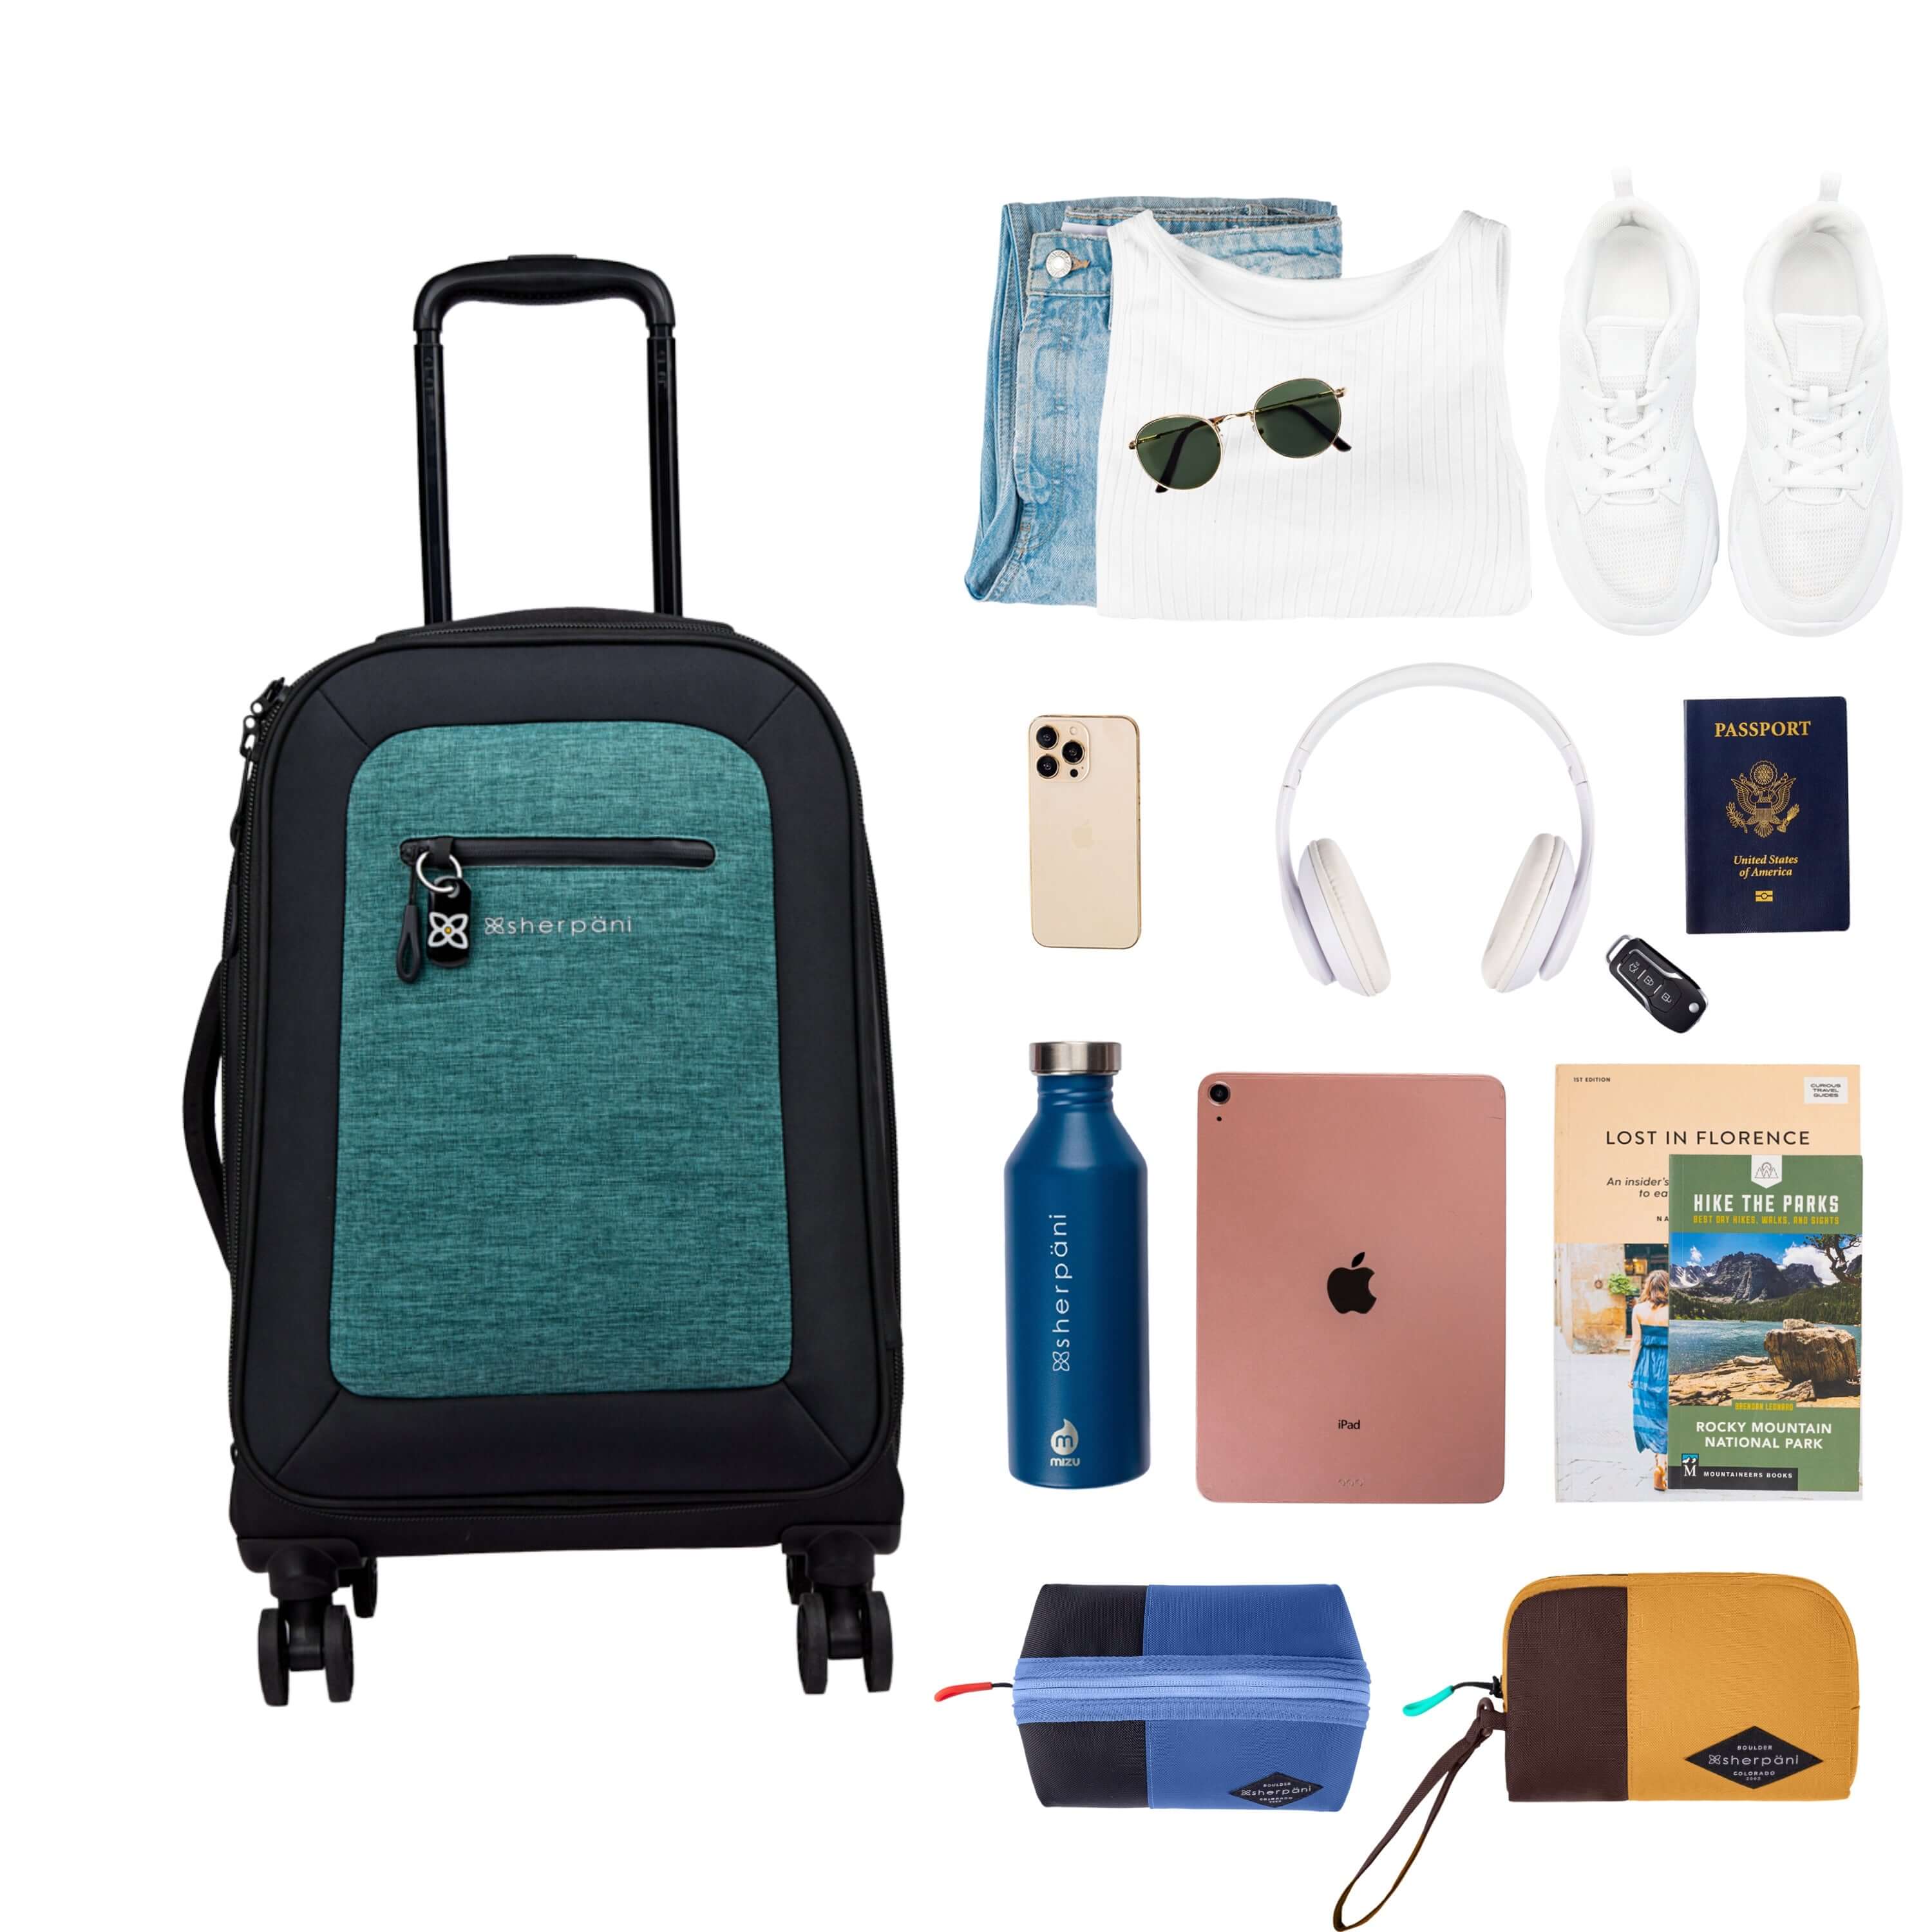 Top view of example items to fill the suitcase. On the left lies Sherpani’s Anti-Theft luggage, the Latitude in Teal. On the right lies an assortment of items: change of clothes, sunglasses, sneakers, phone, headphones, car key, passport, water bottle, tablet, travel books and Sherpani travel accessories the Harmony in Pacific Blue and the Jolie in Sundial. 